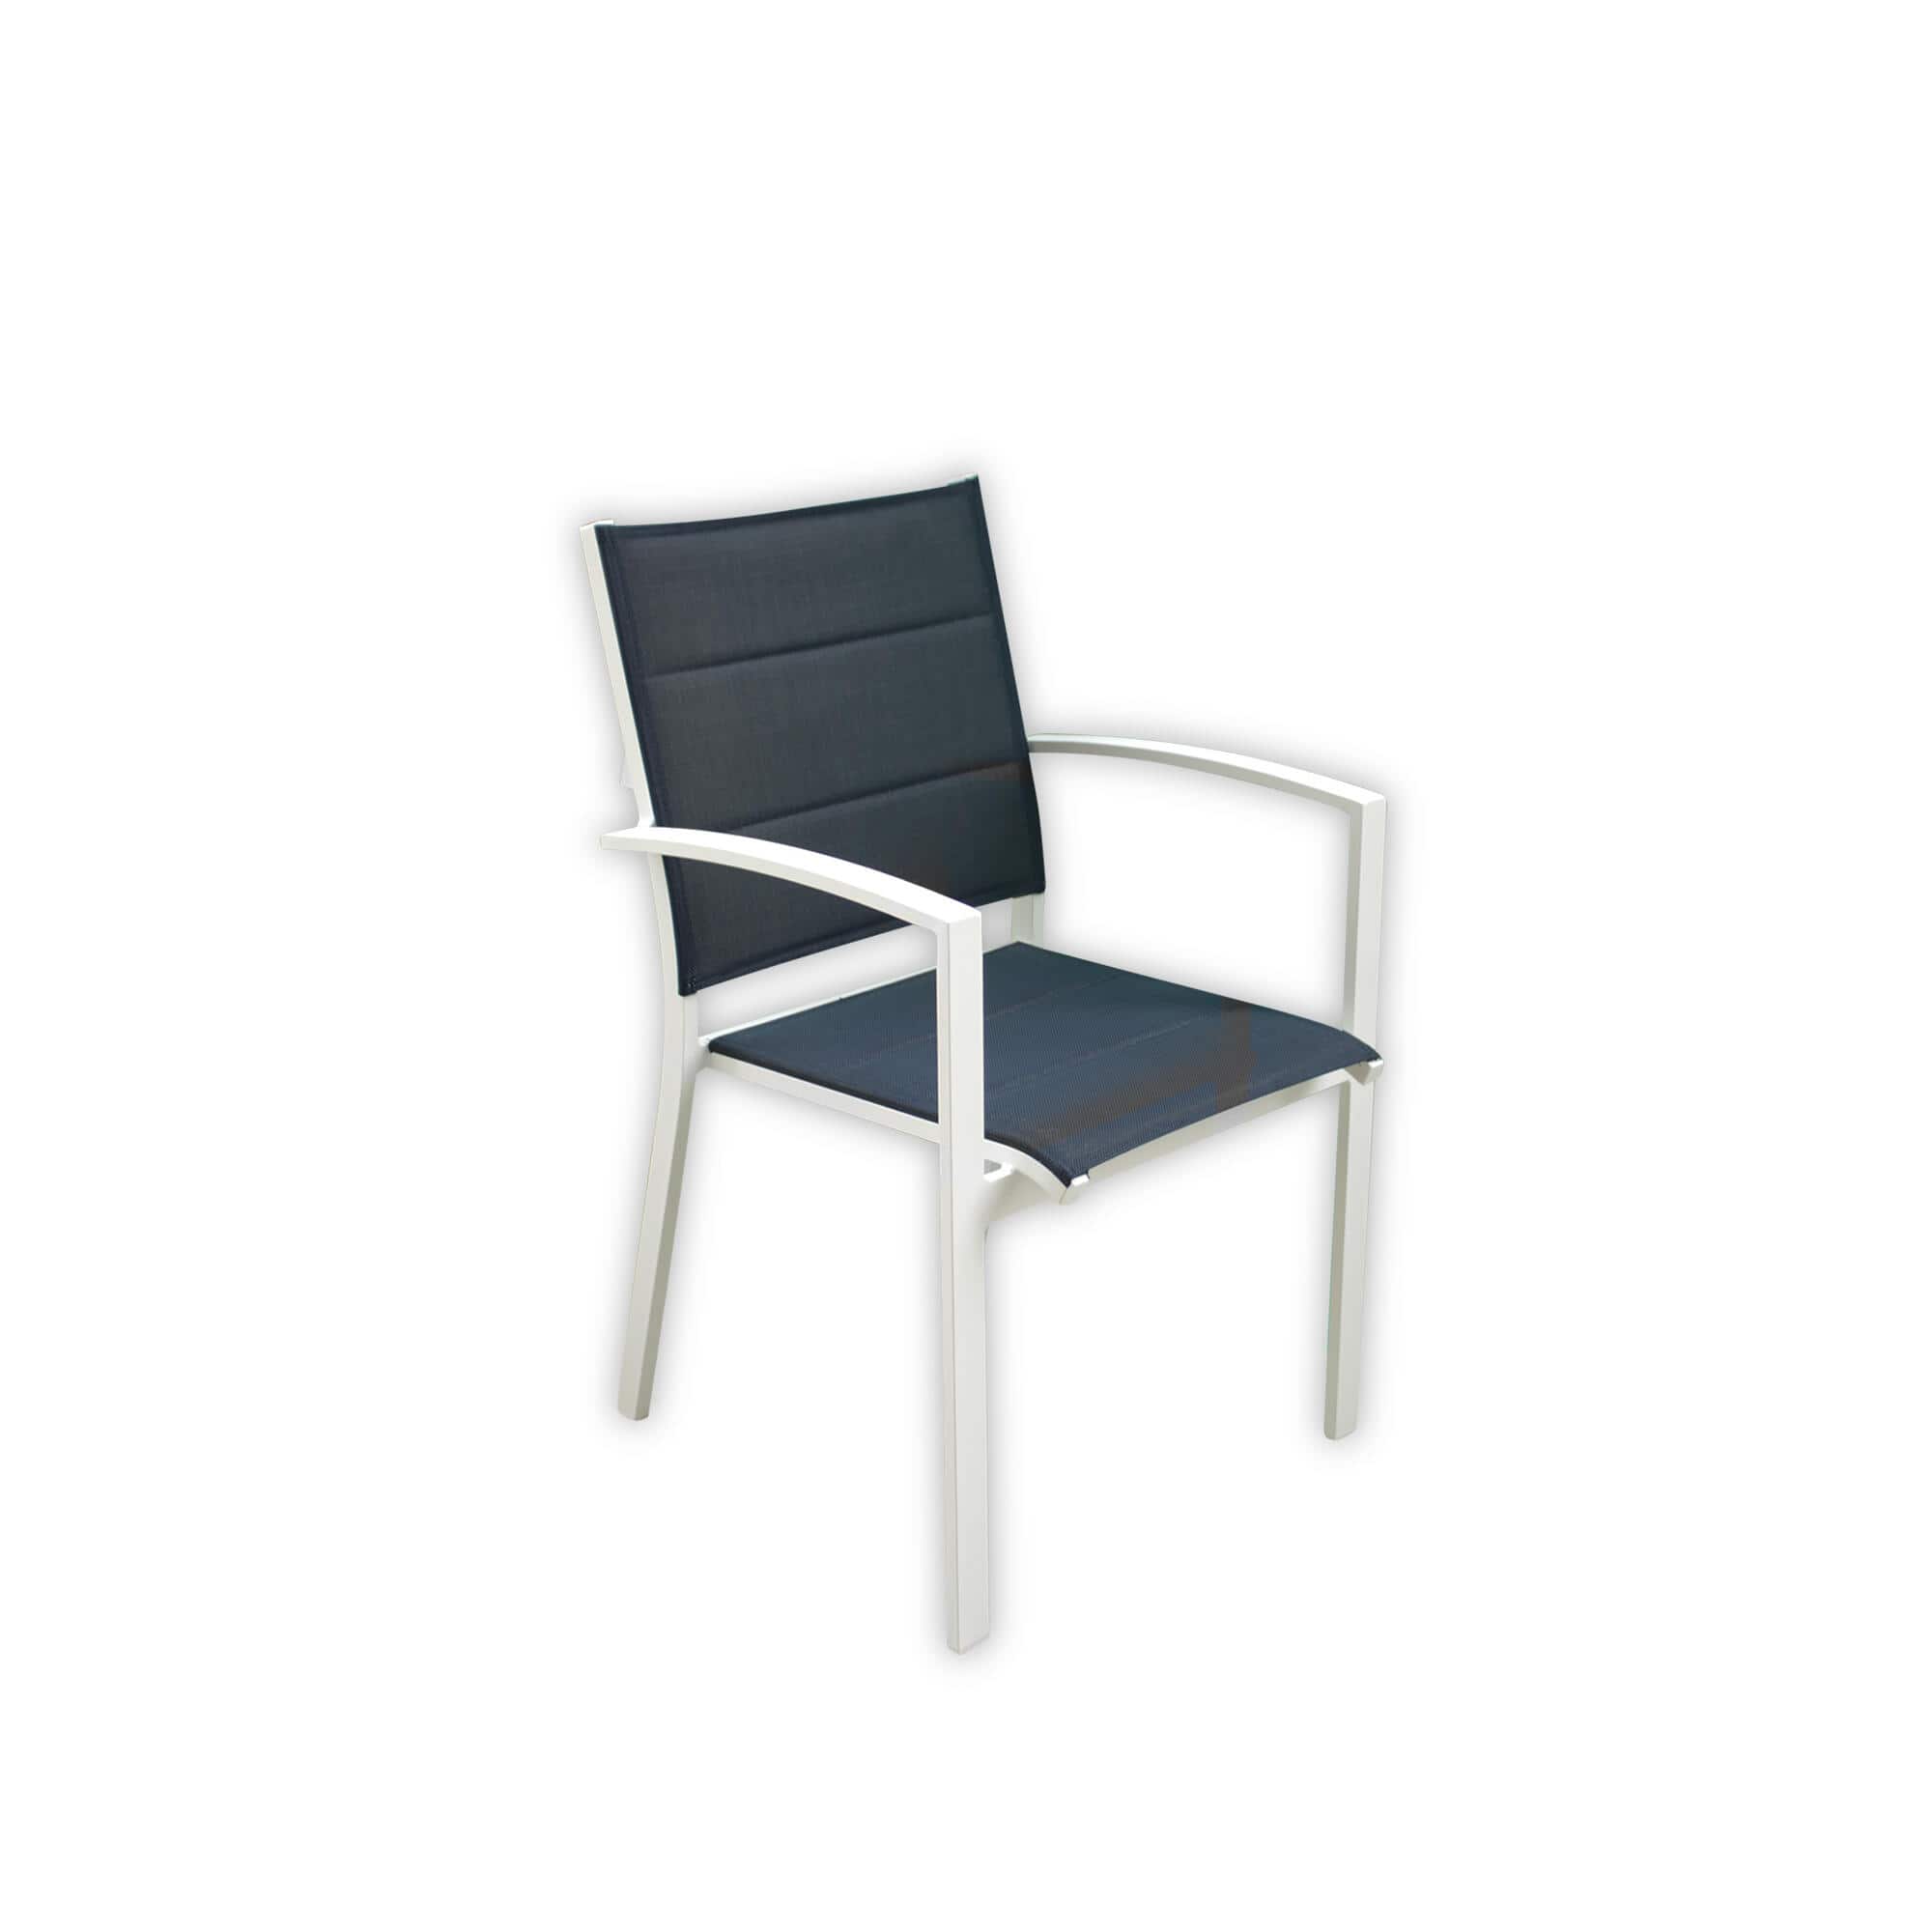 Courtyard Casual Outdoor Dining Chair Courtyard Casual -  Skyline White Aluminum Outdoor Dining Chair, 6 pc Set | 5079